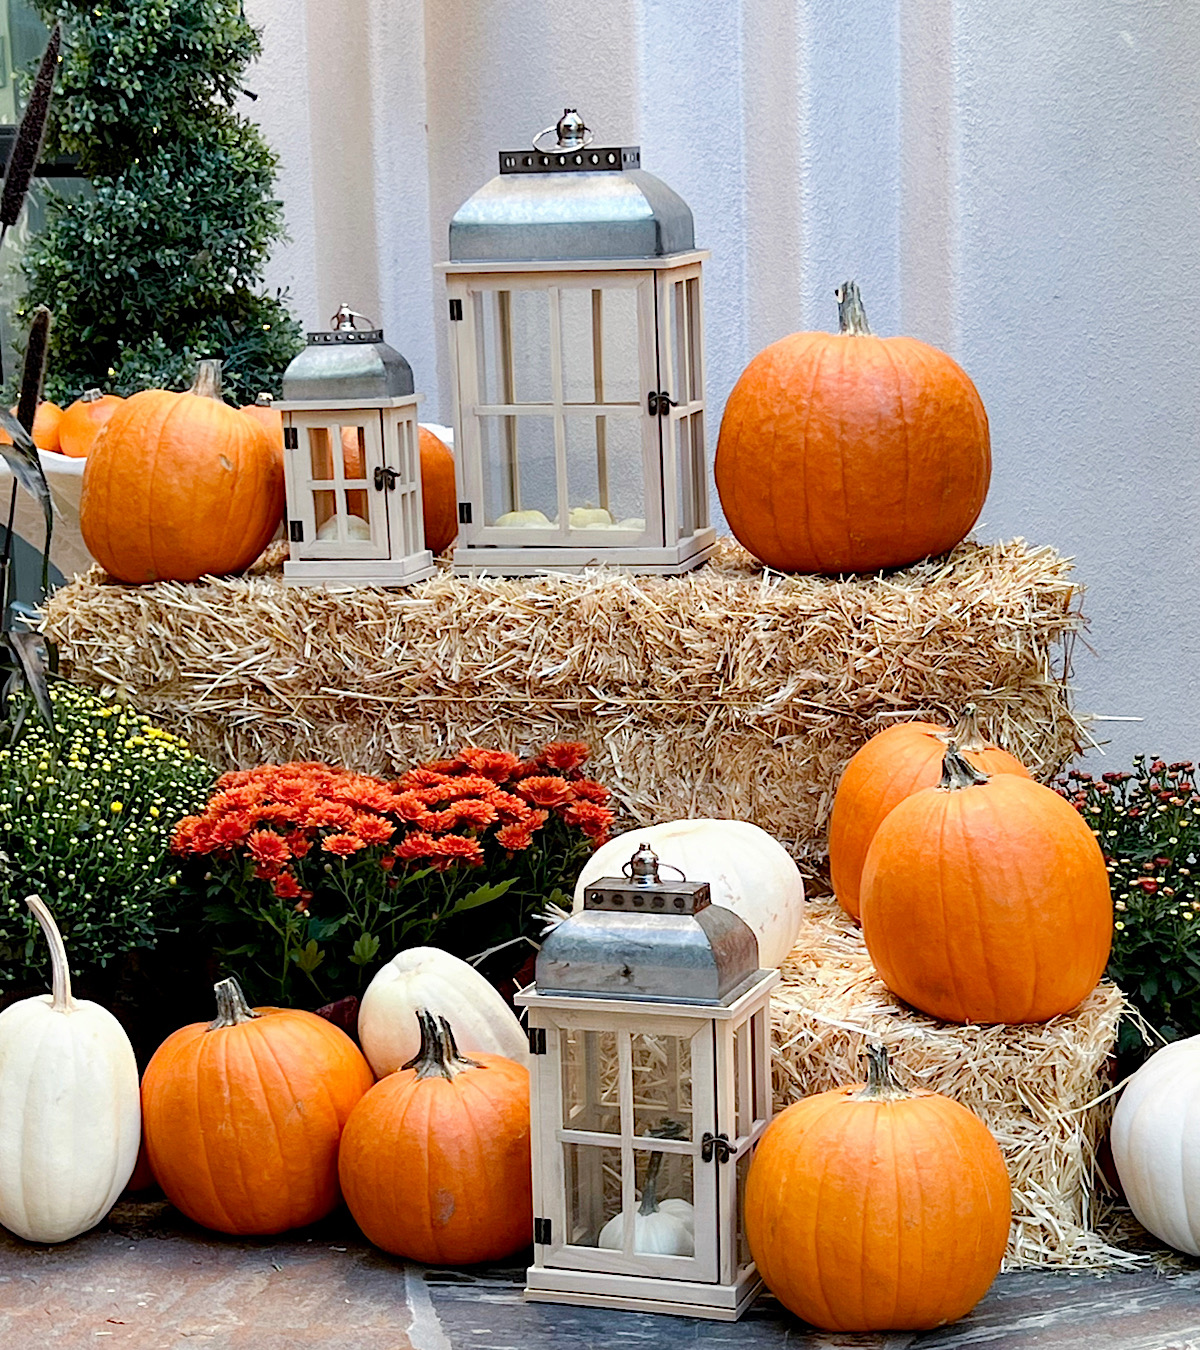 Fall Hay Bale Decorating Ideas: Tips on How to Style a Charming Fall Porch or Courtyard